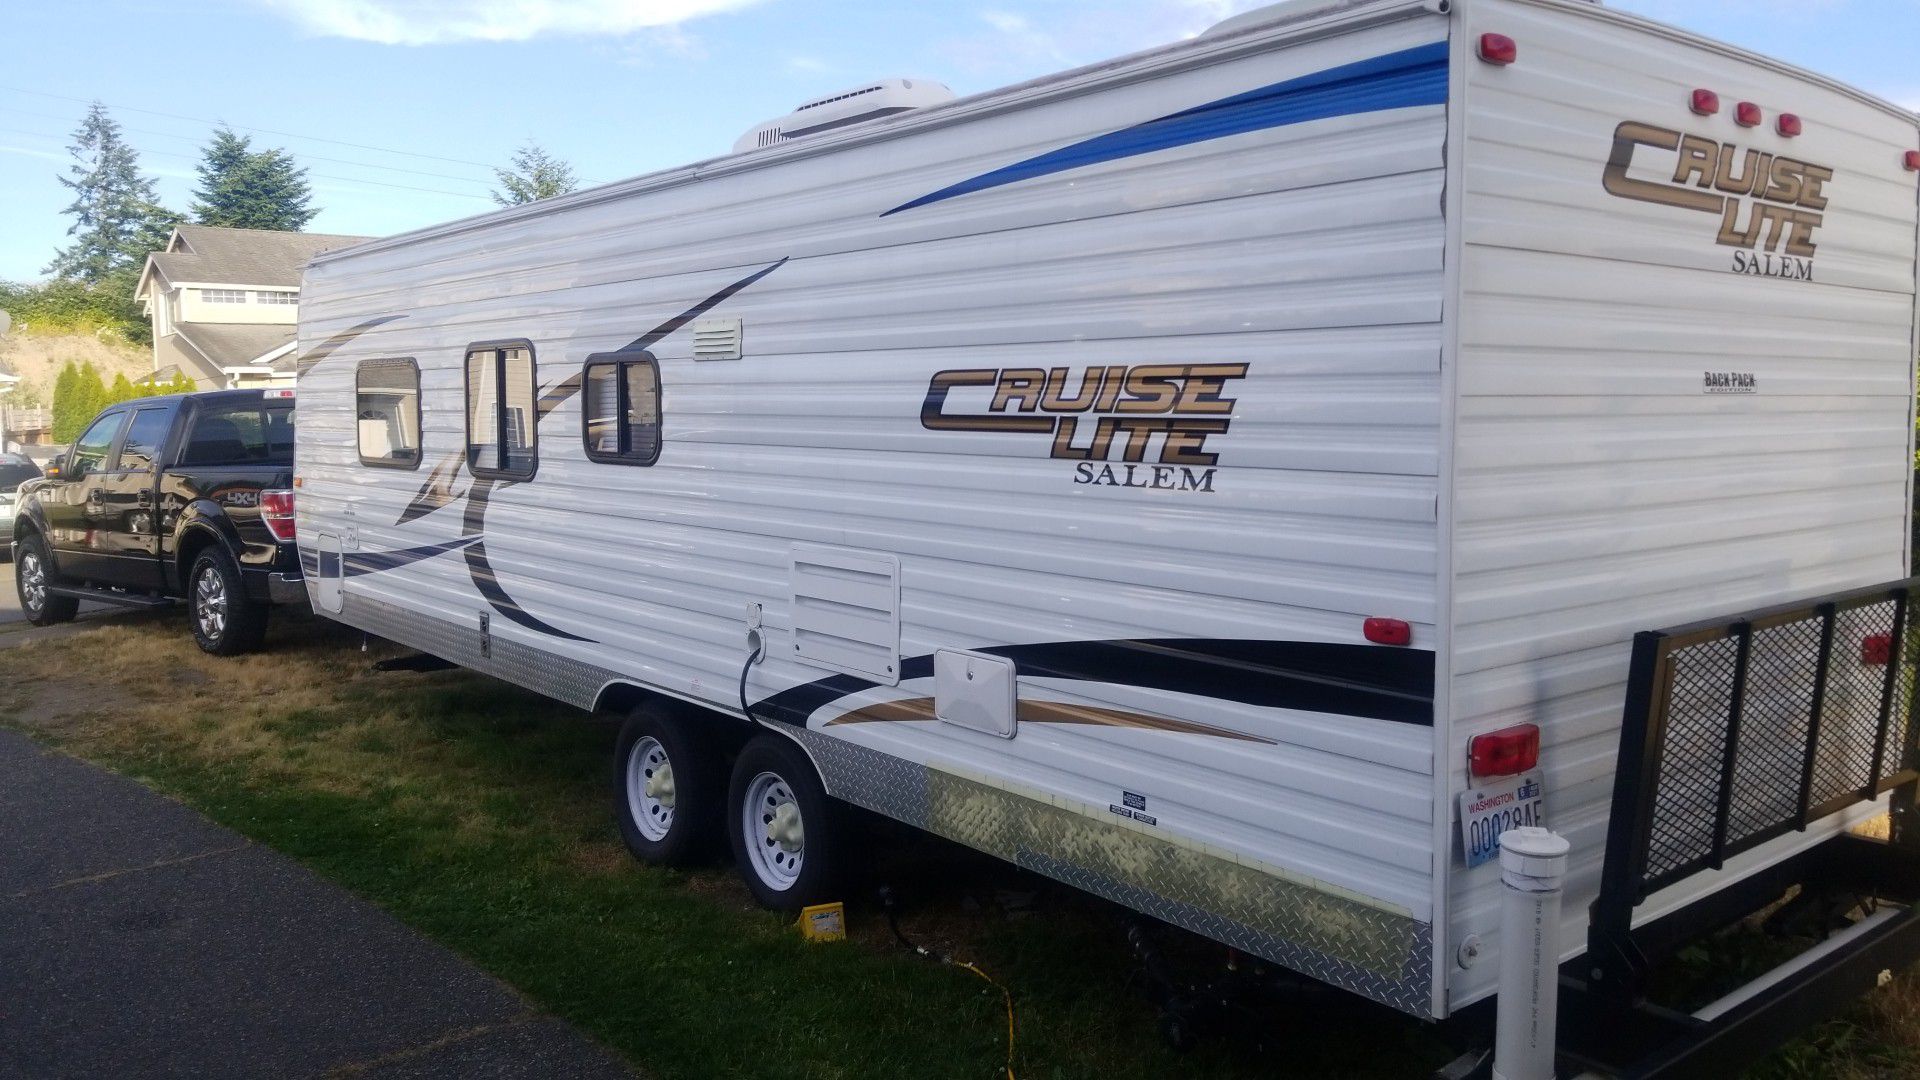 2012 salem cruiselight 27 foot camper sleeps up too nine people bunkhouse 10,500 OBO in great condition no pets or smoking.